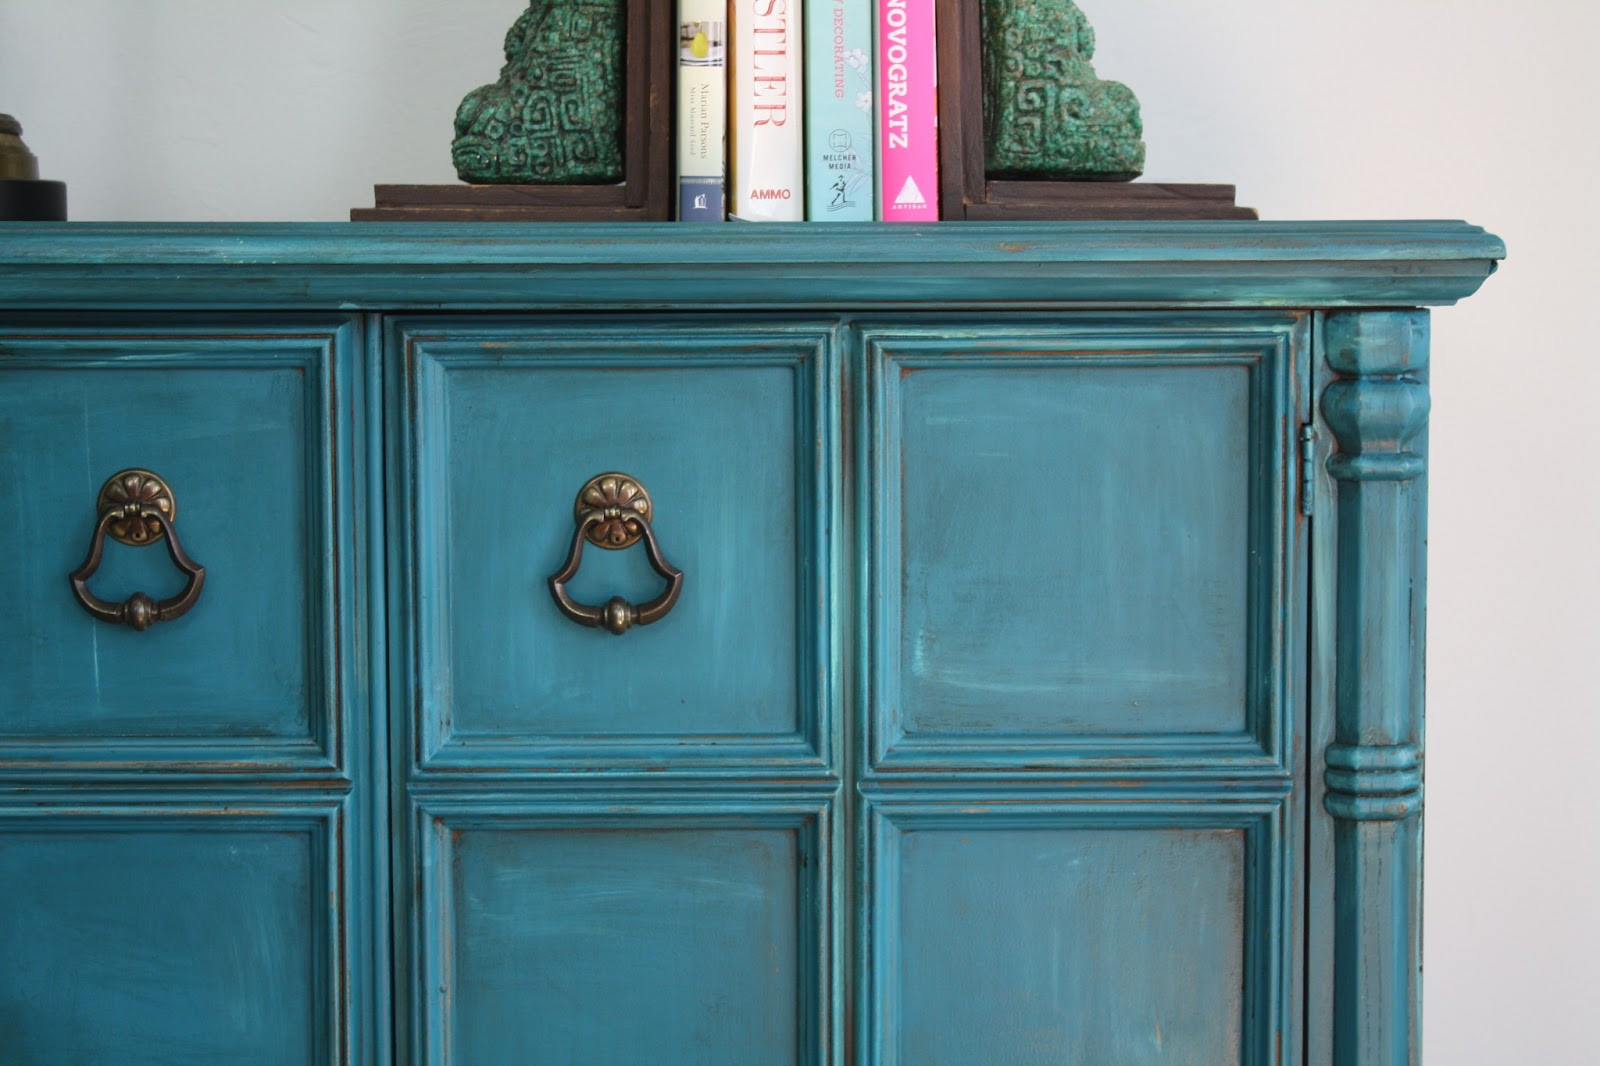 Best ideas about Teal Entryway Table
. Save or Pin The Turquoise Iris Furniture & Art Teal Vintage Foyer Table Now.